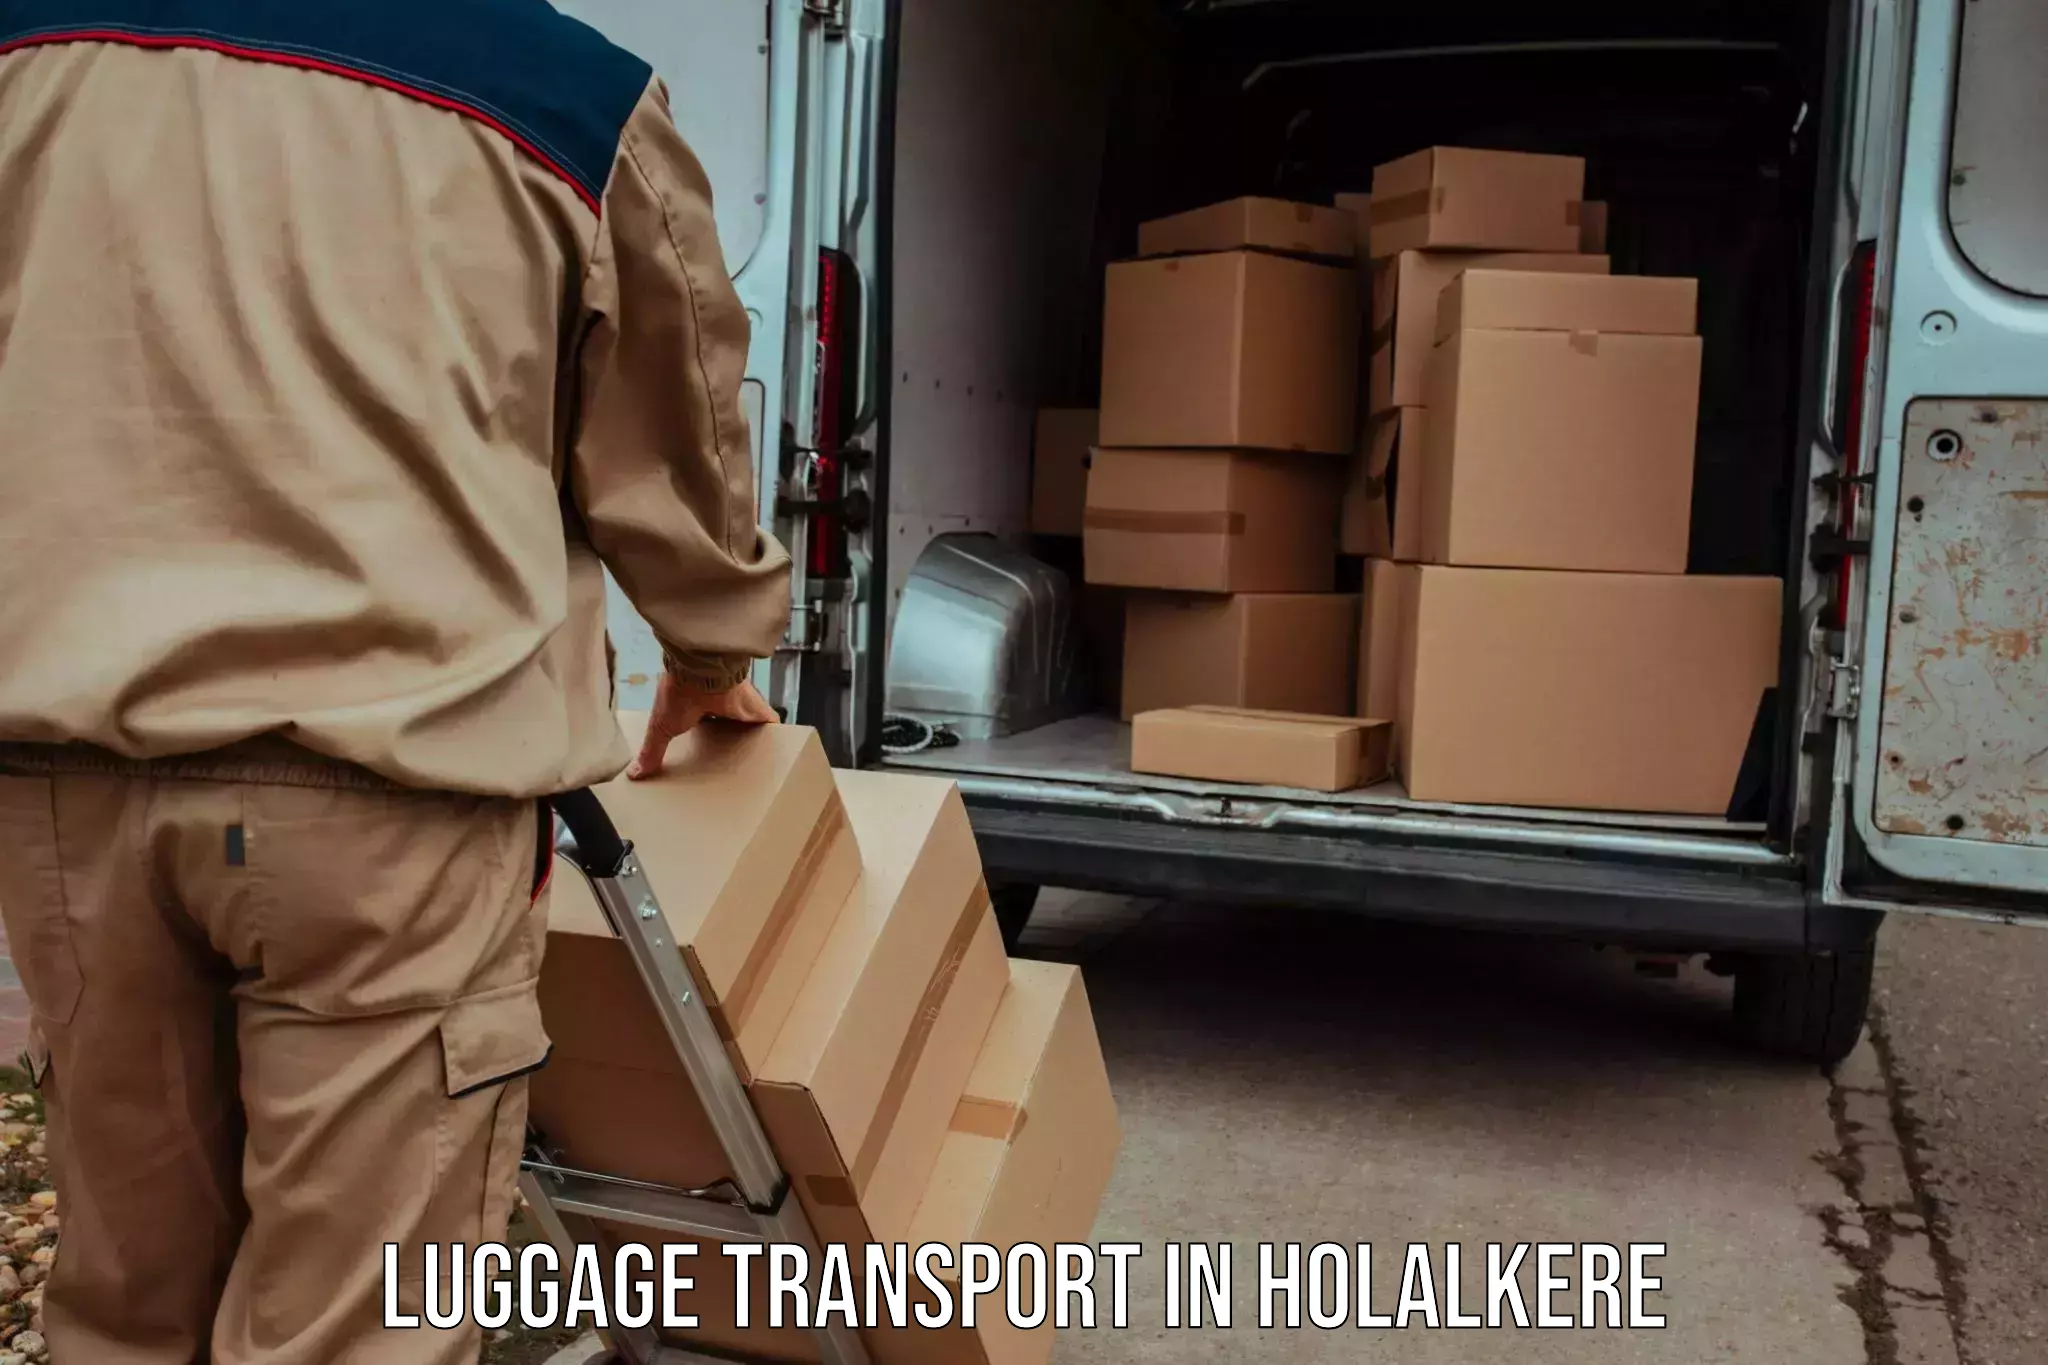 Luggage transport consultancy in Holalkere